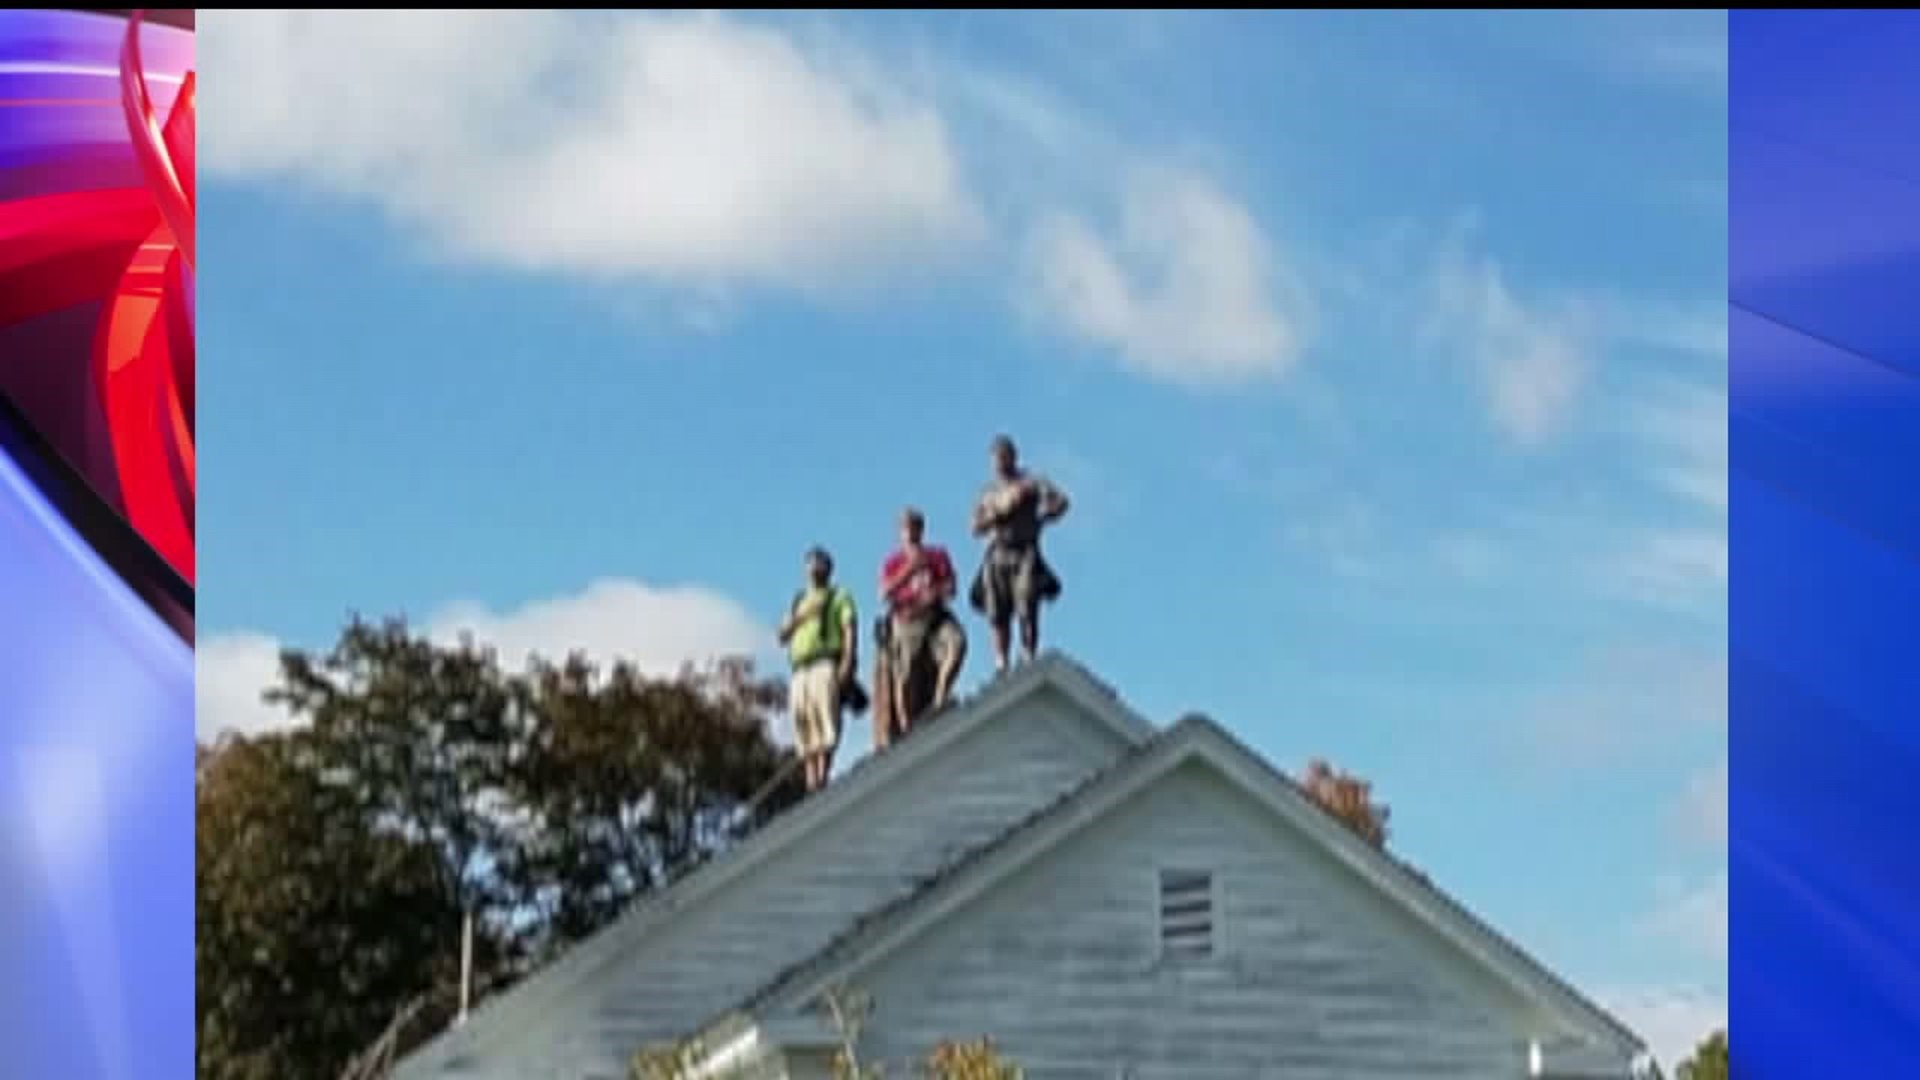 Roofers stand for National Anthem